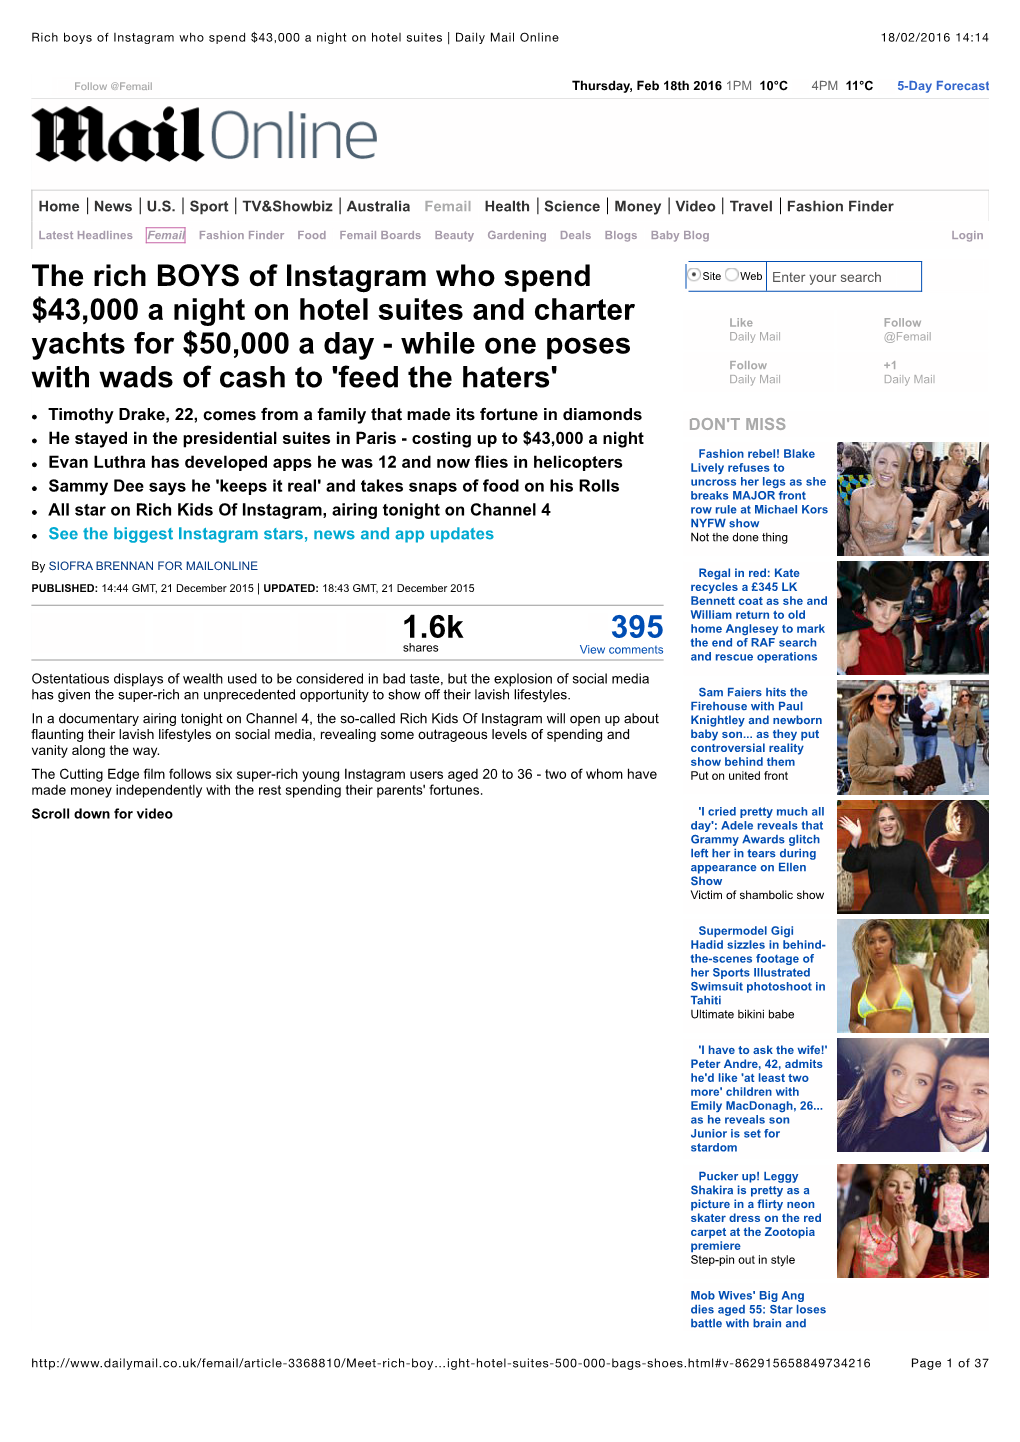 Rich Boys of Instagram Who Spend $43,000 a Night on Hotel Suites | Daily Mail Online 18/02/2016 14:14